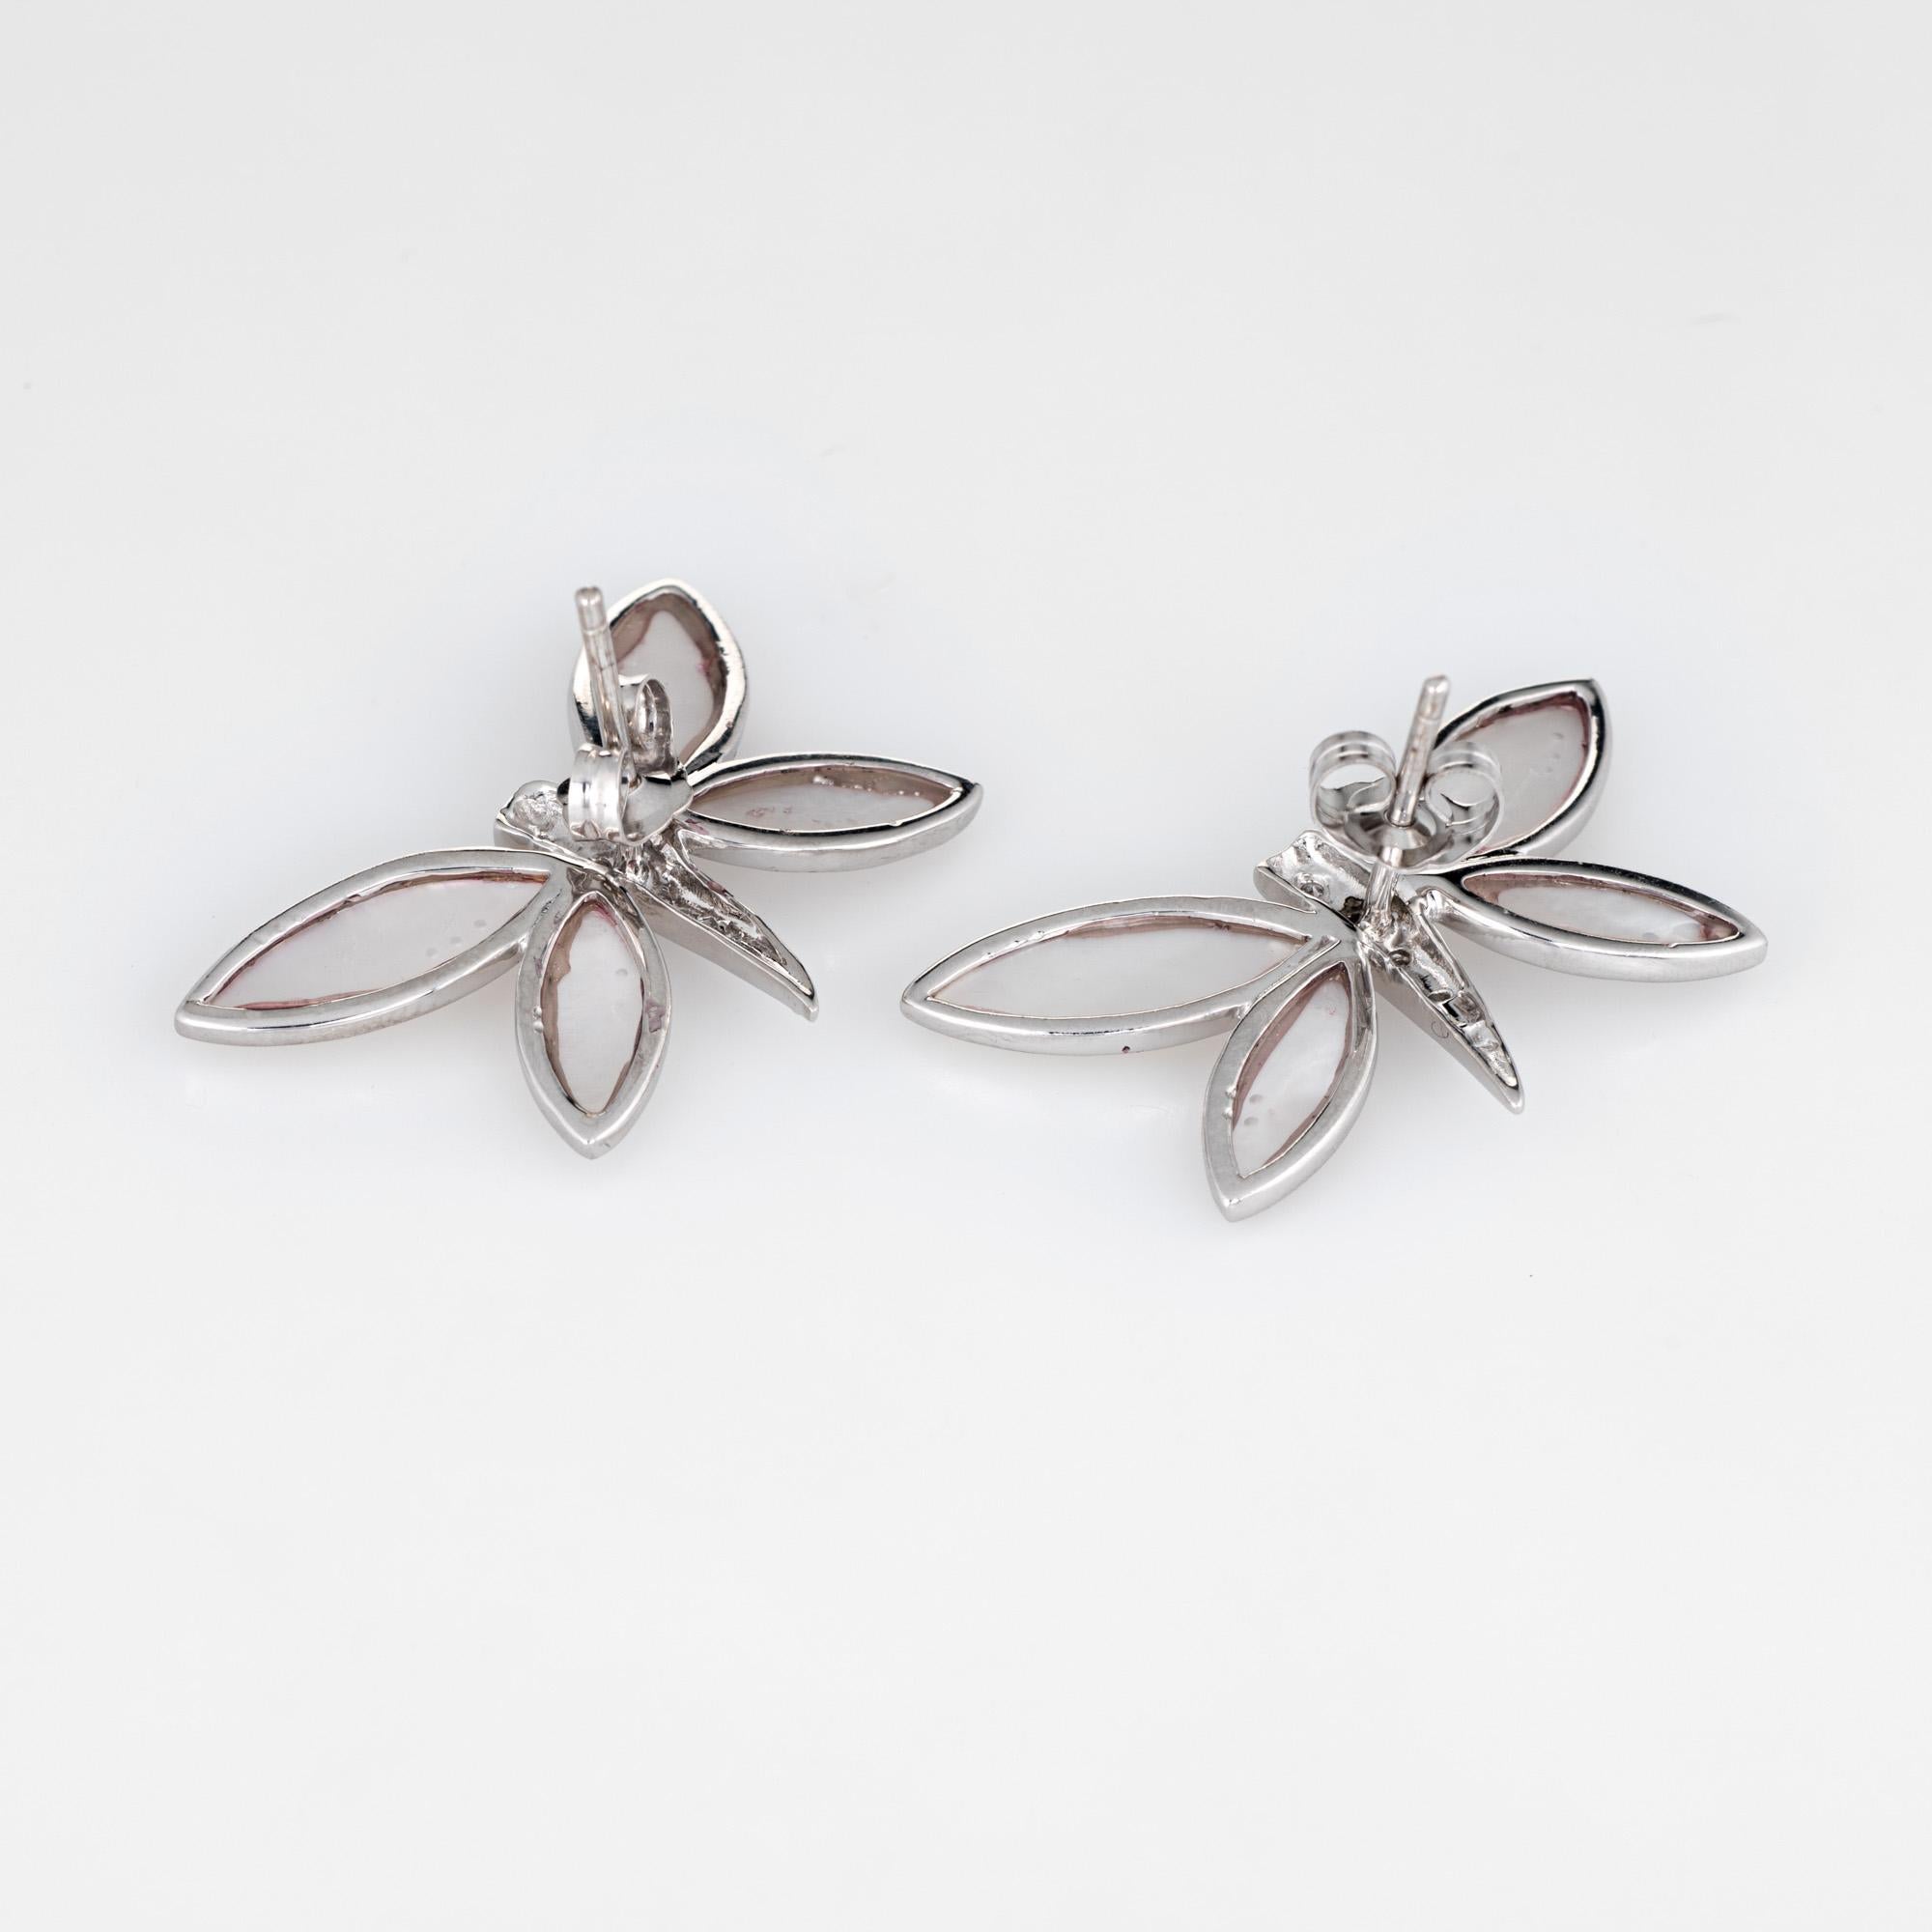 Elegant pair of diamond & mother of pearl butterfly earrings crafted in 14k white gold. 

Mother of pearl is bezel set into the mounts measuring 12mm x 4mm (upper) and 10mm x 4mm (lower). The diamonds total an estimated 0.08 carats (estimated at I-J